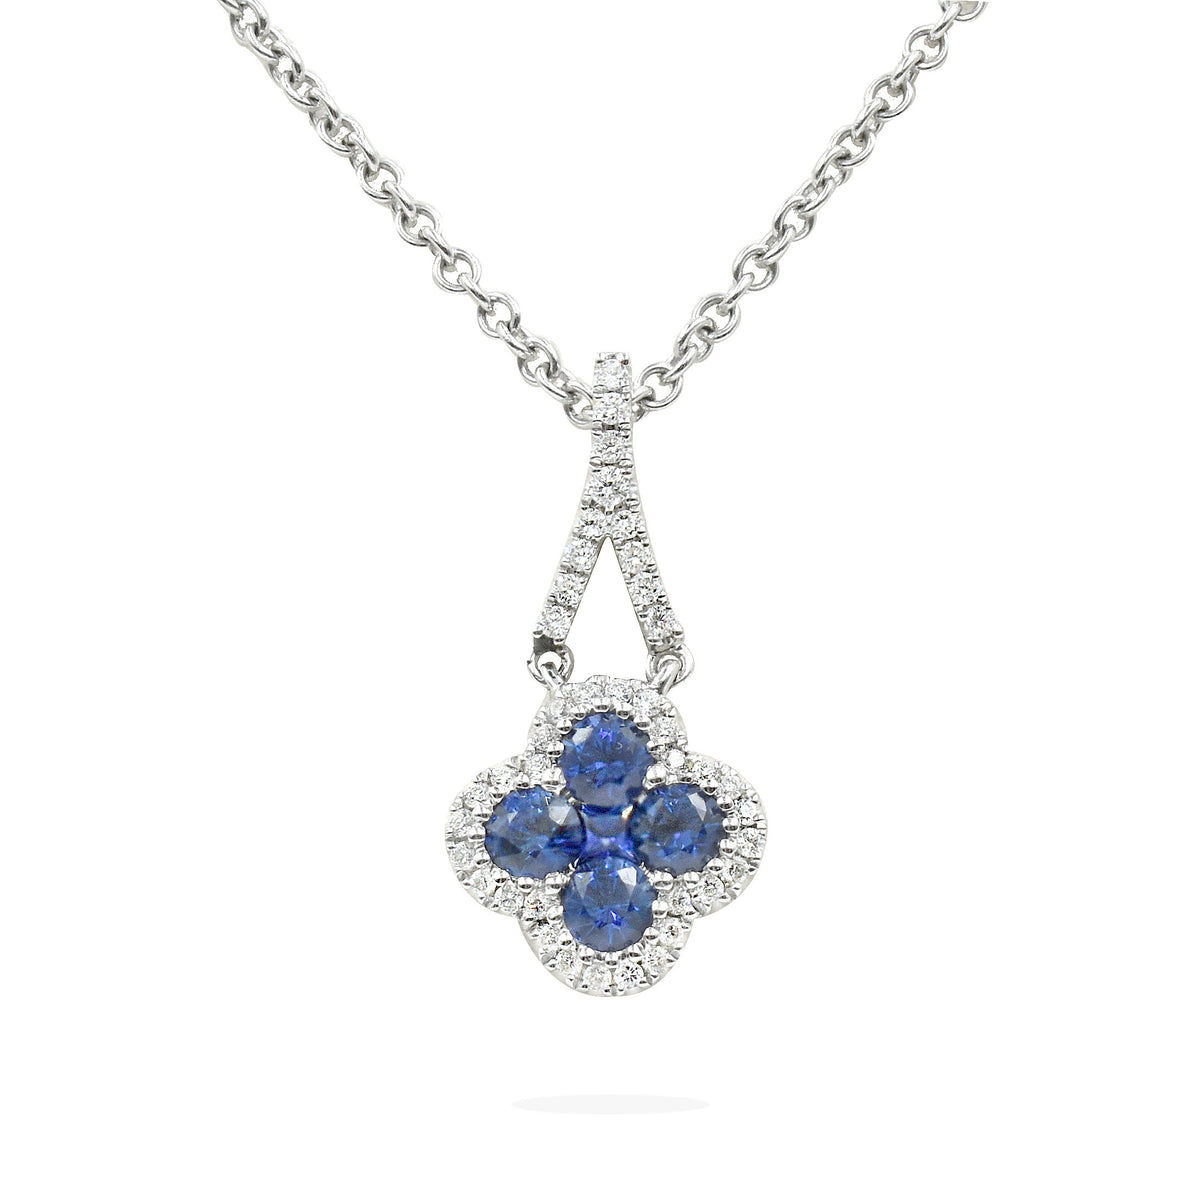 18K White Gold Clover Pendant with Sapphires and Diamonds